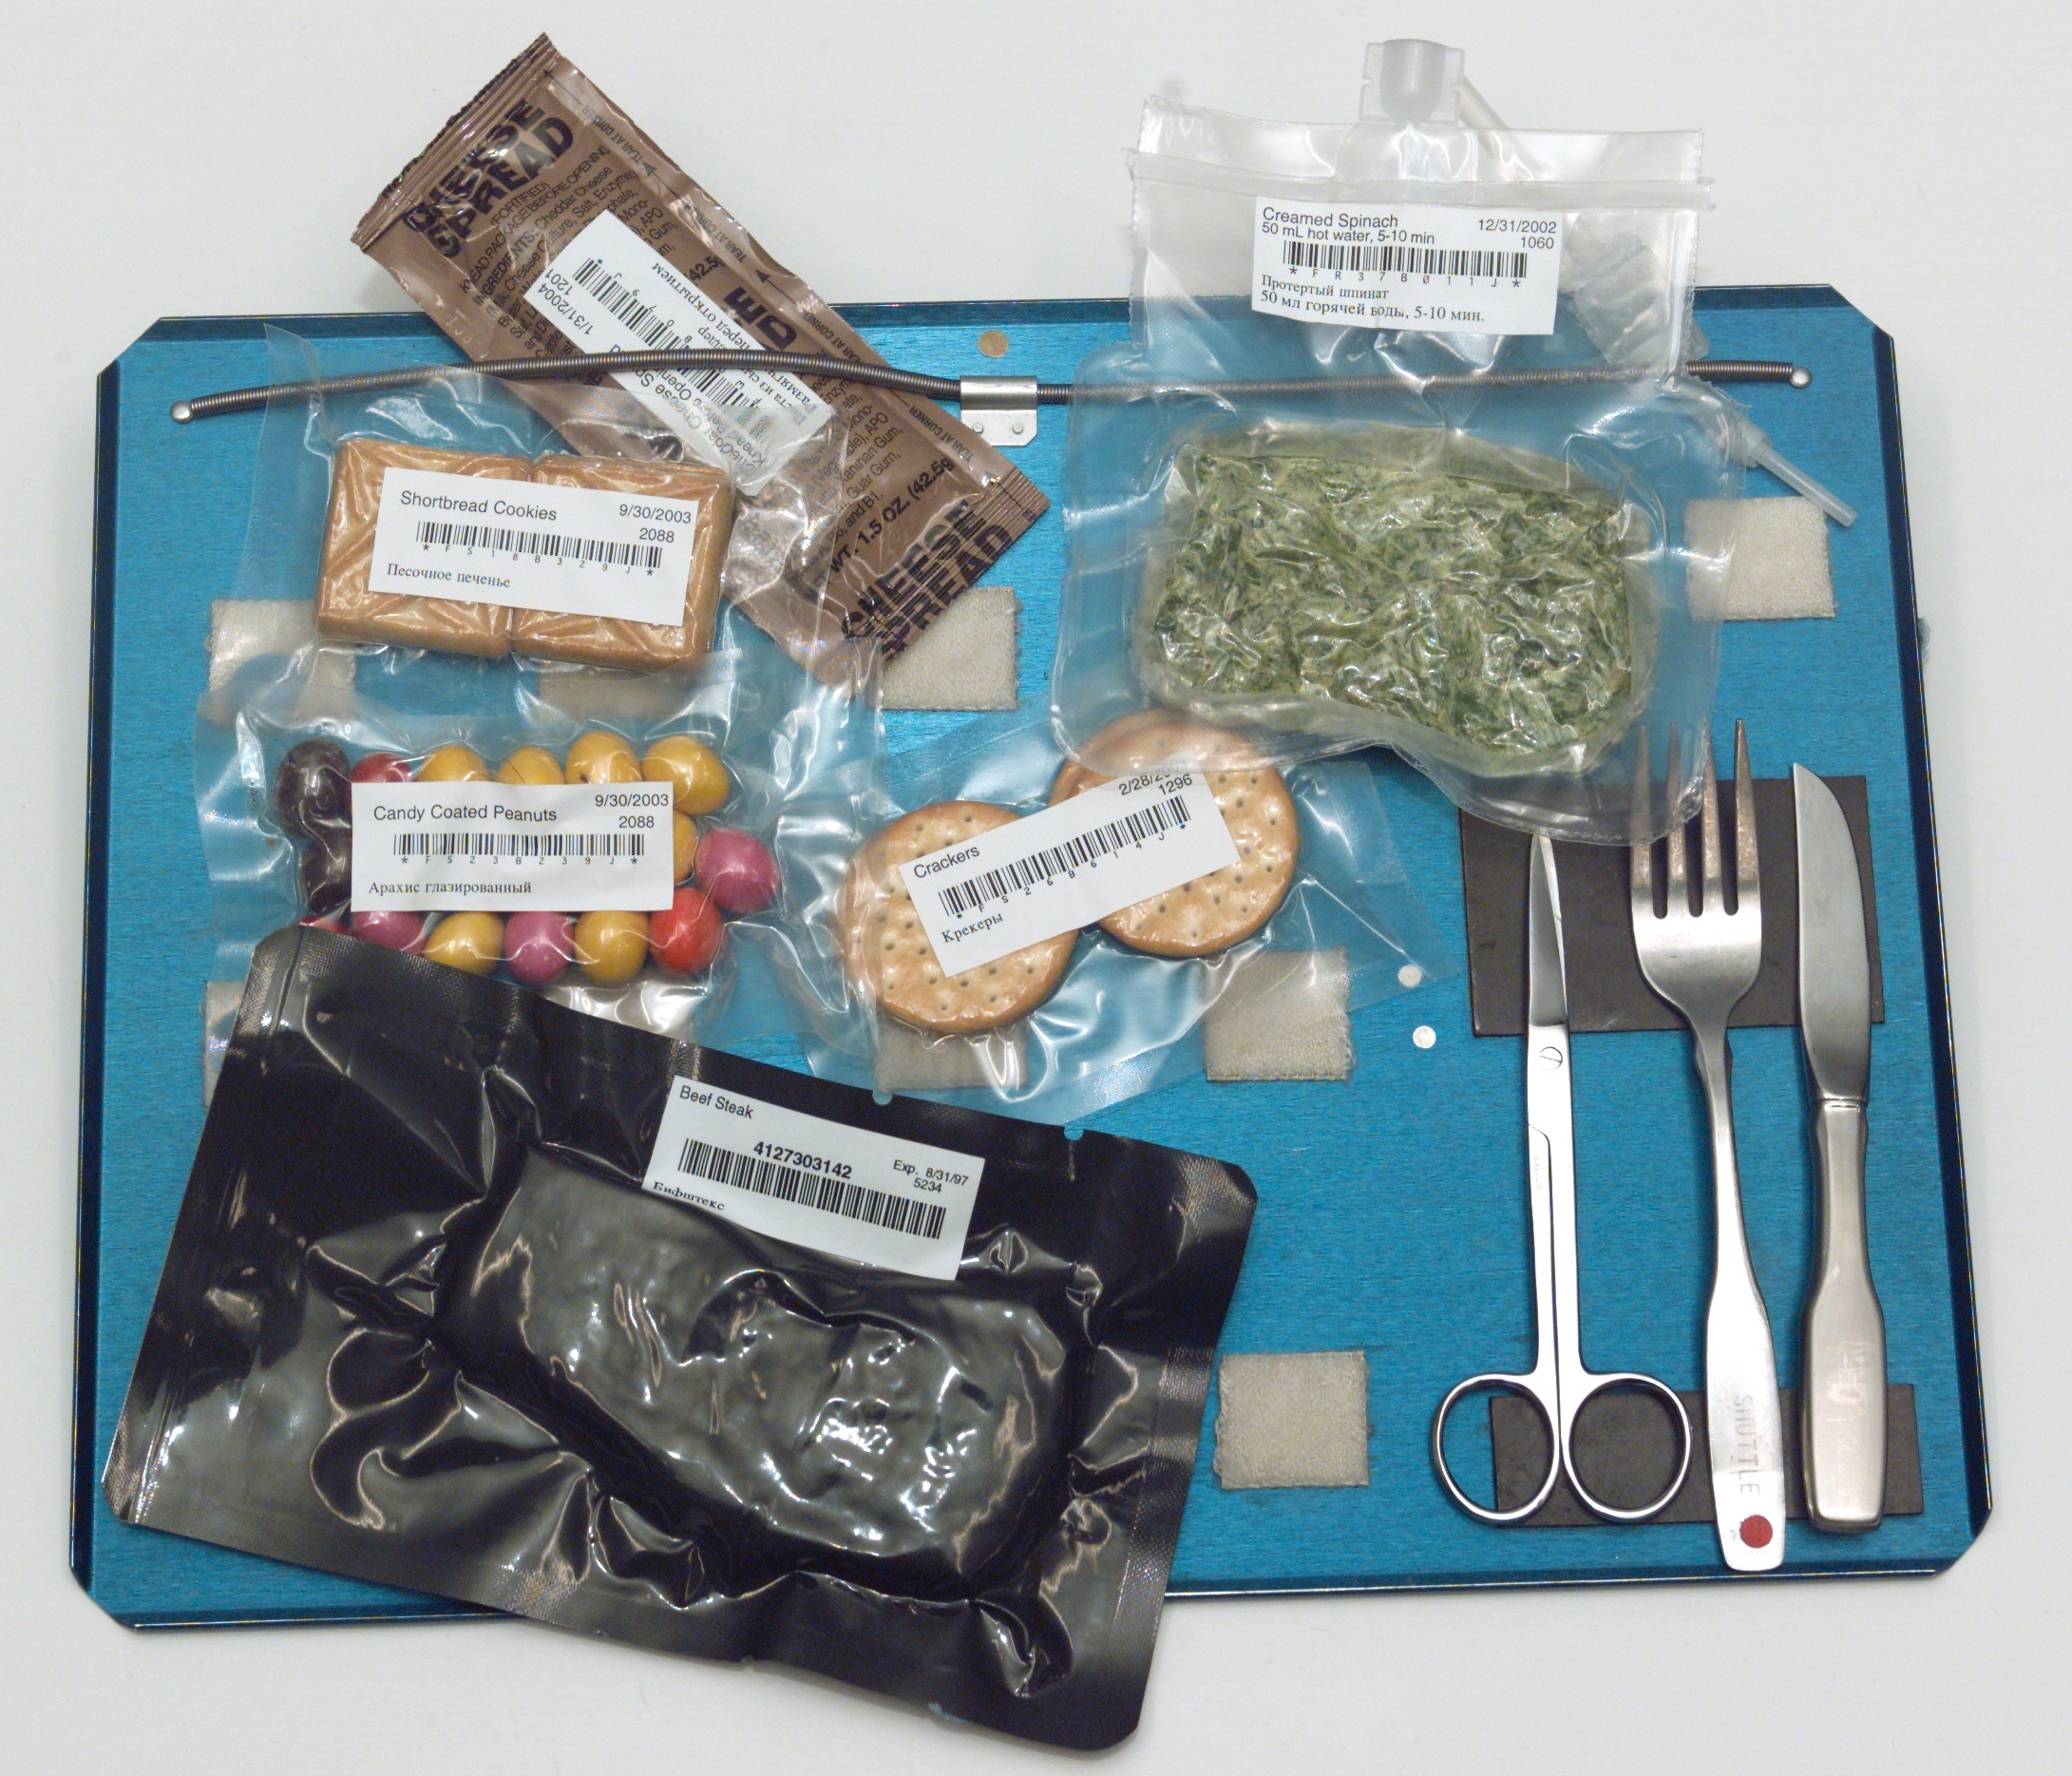 Magnets, springs, and velcro keep cutlery and food packets from floating away. Photo courtesy of NASA.